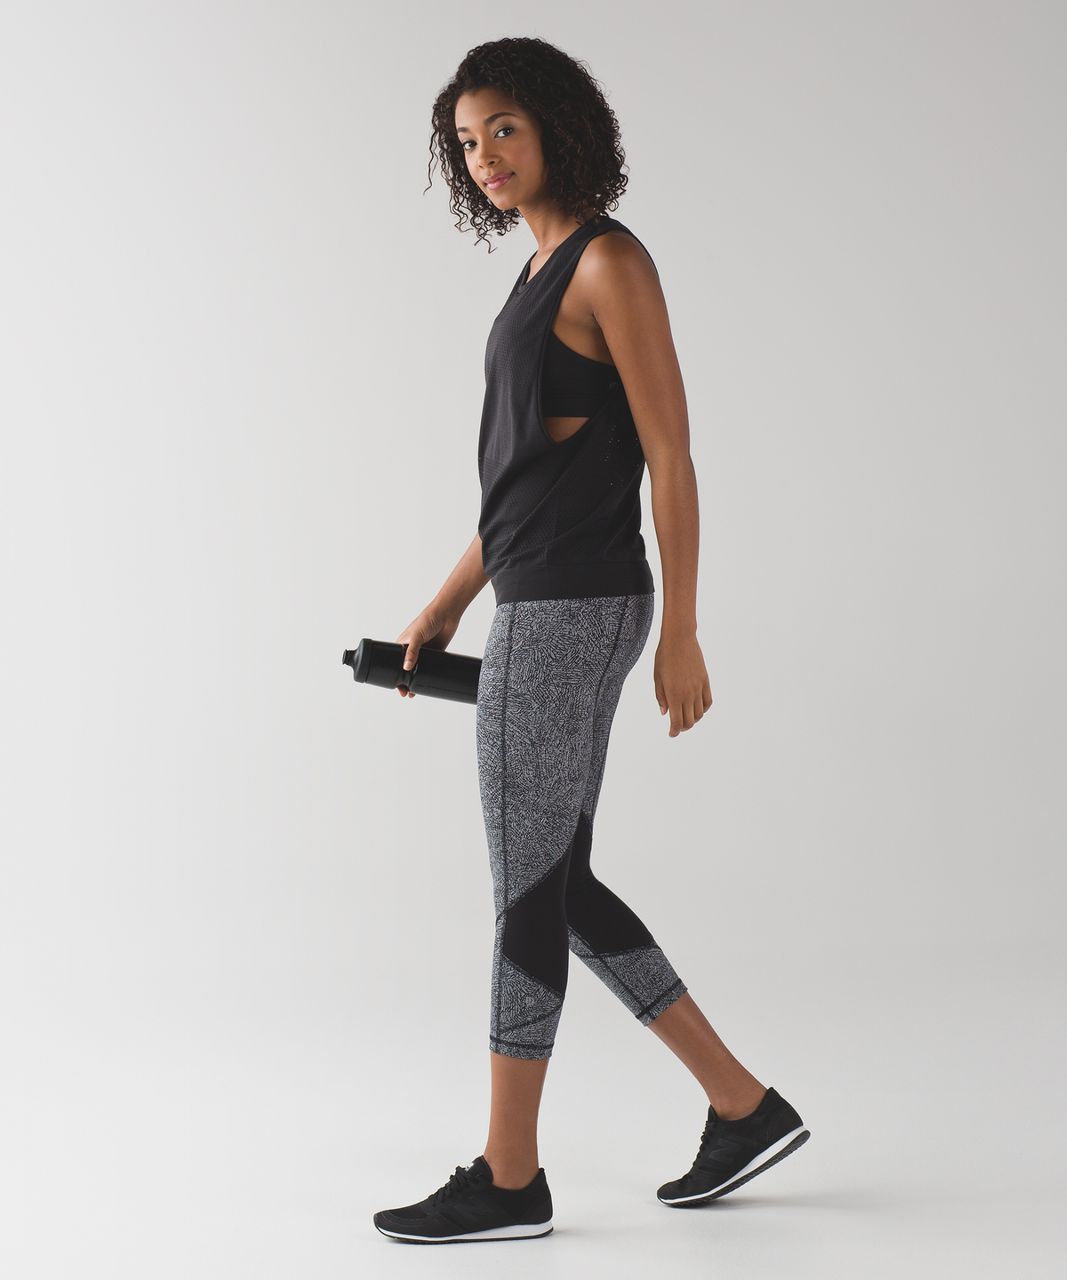 Lululemon Pace Rival Crop Black Ruched Ankle Side Pocket Active Leggings  Size 4 - $36 - From gracieumbrella